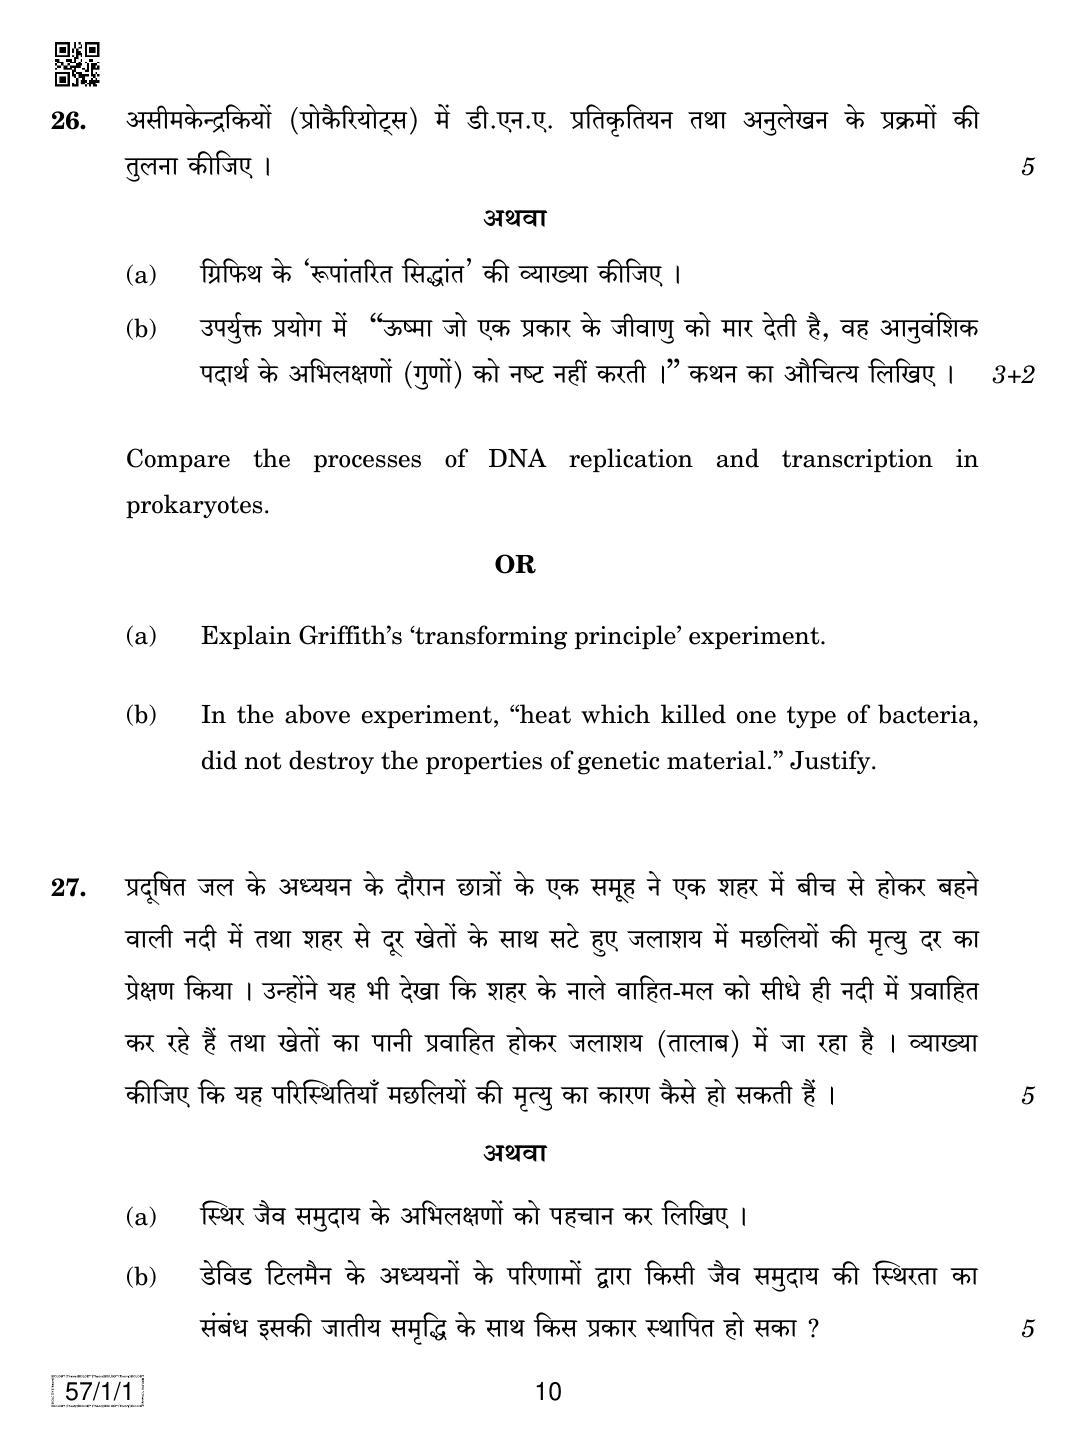 CBSE Class 12 57-1-1 BIOLOGY 2019 Compartment Question Paper - Page 10